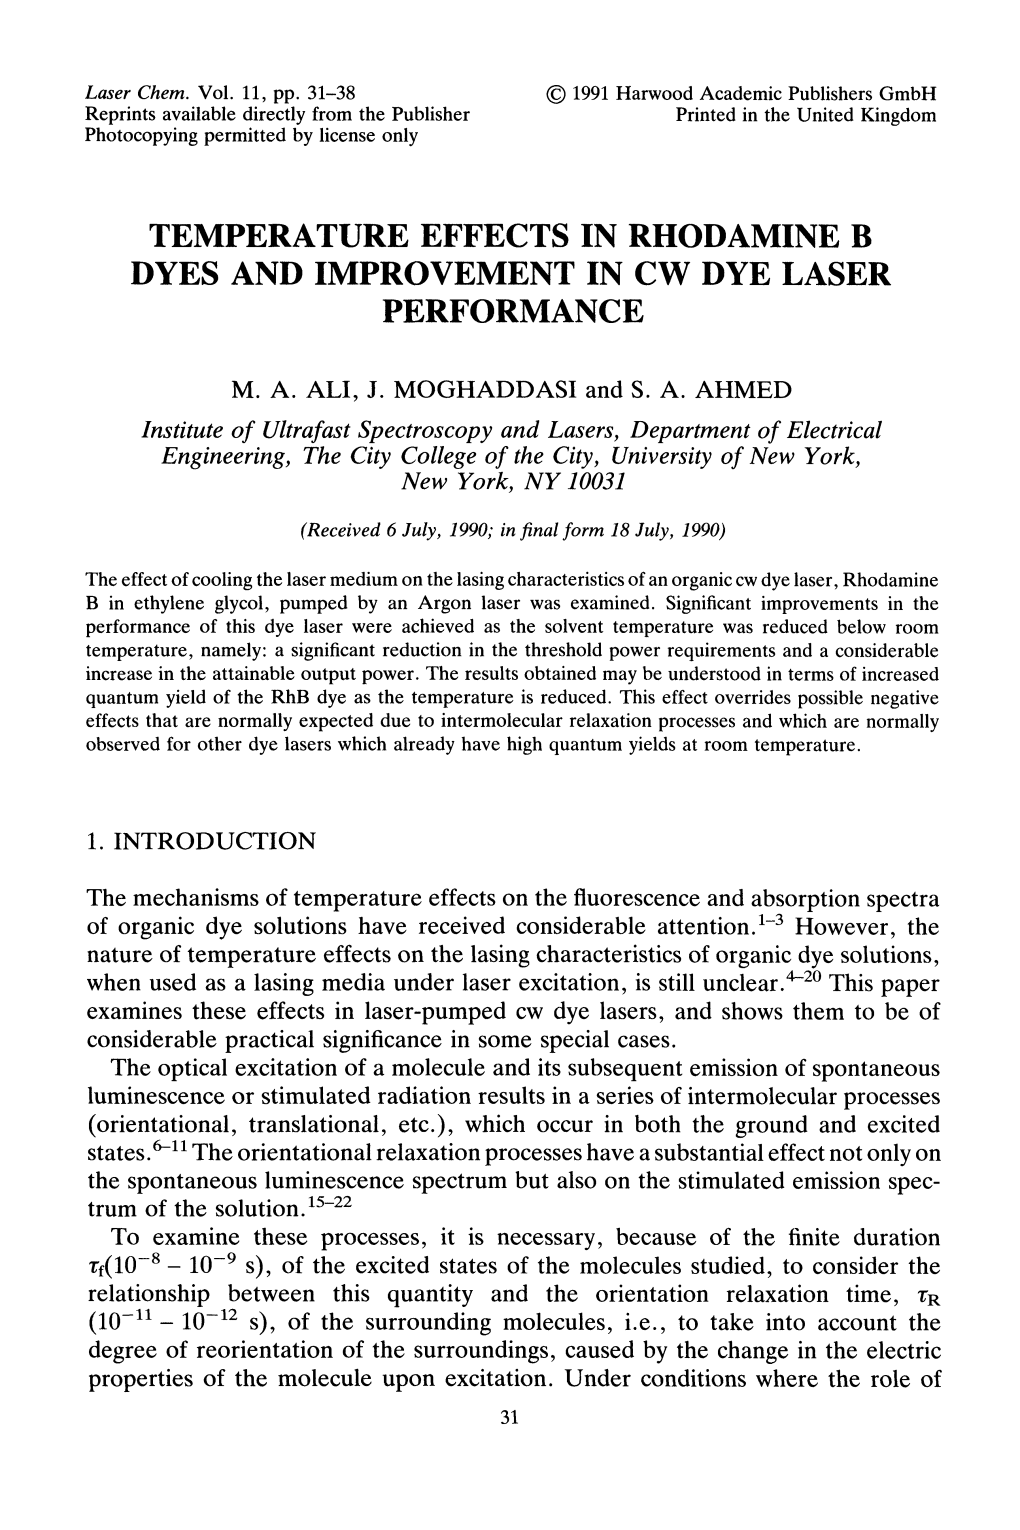 Temperature Effects in Rhodamine B Dyes and Improvement in Cw Dye Laser Performance